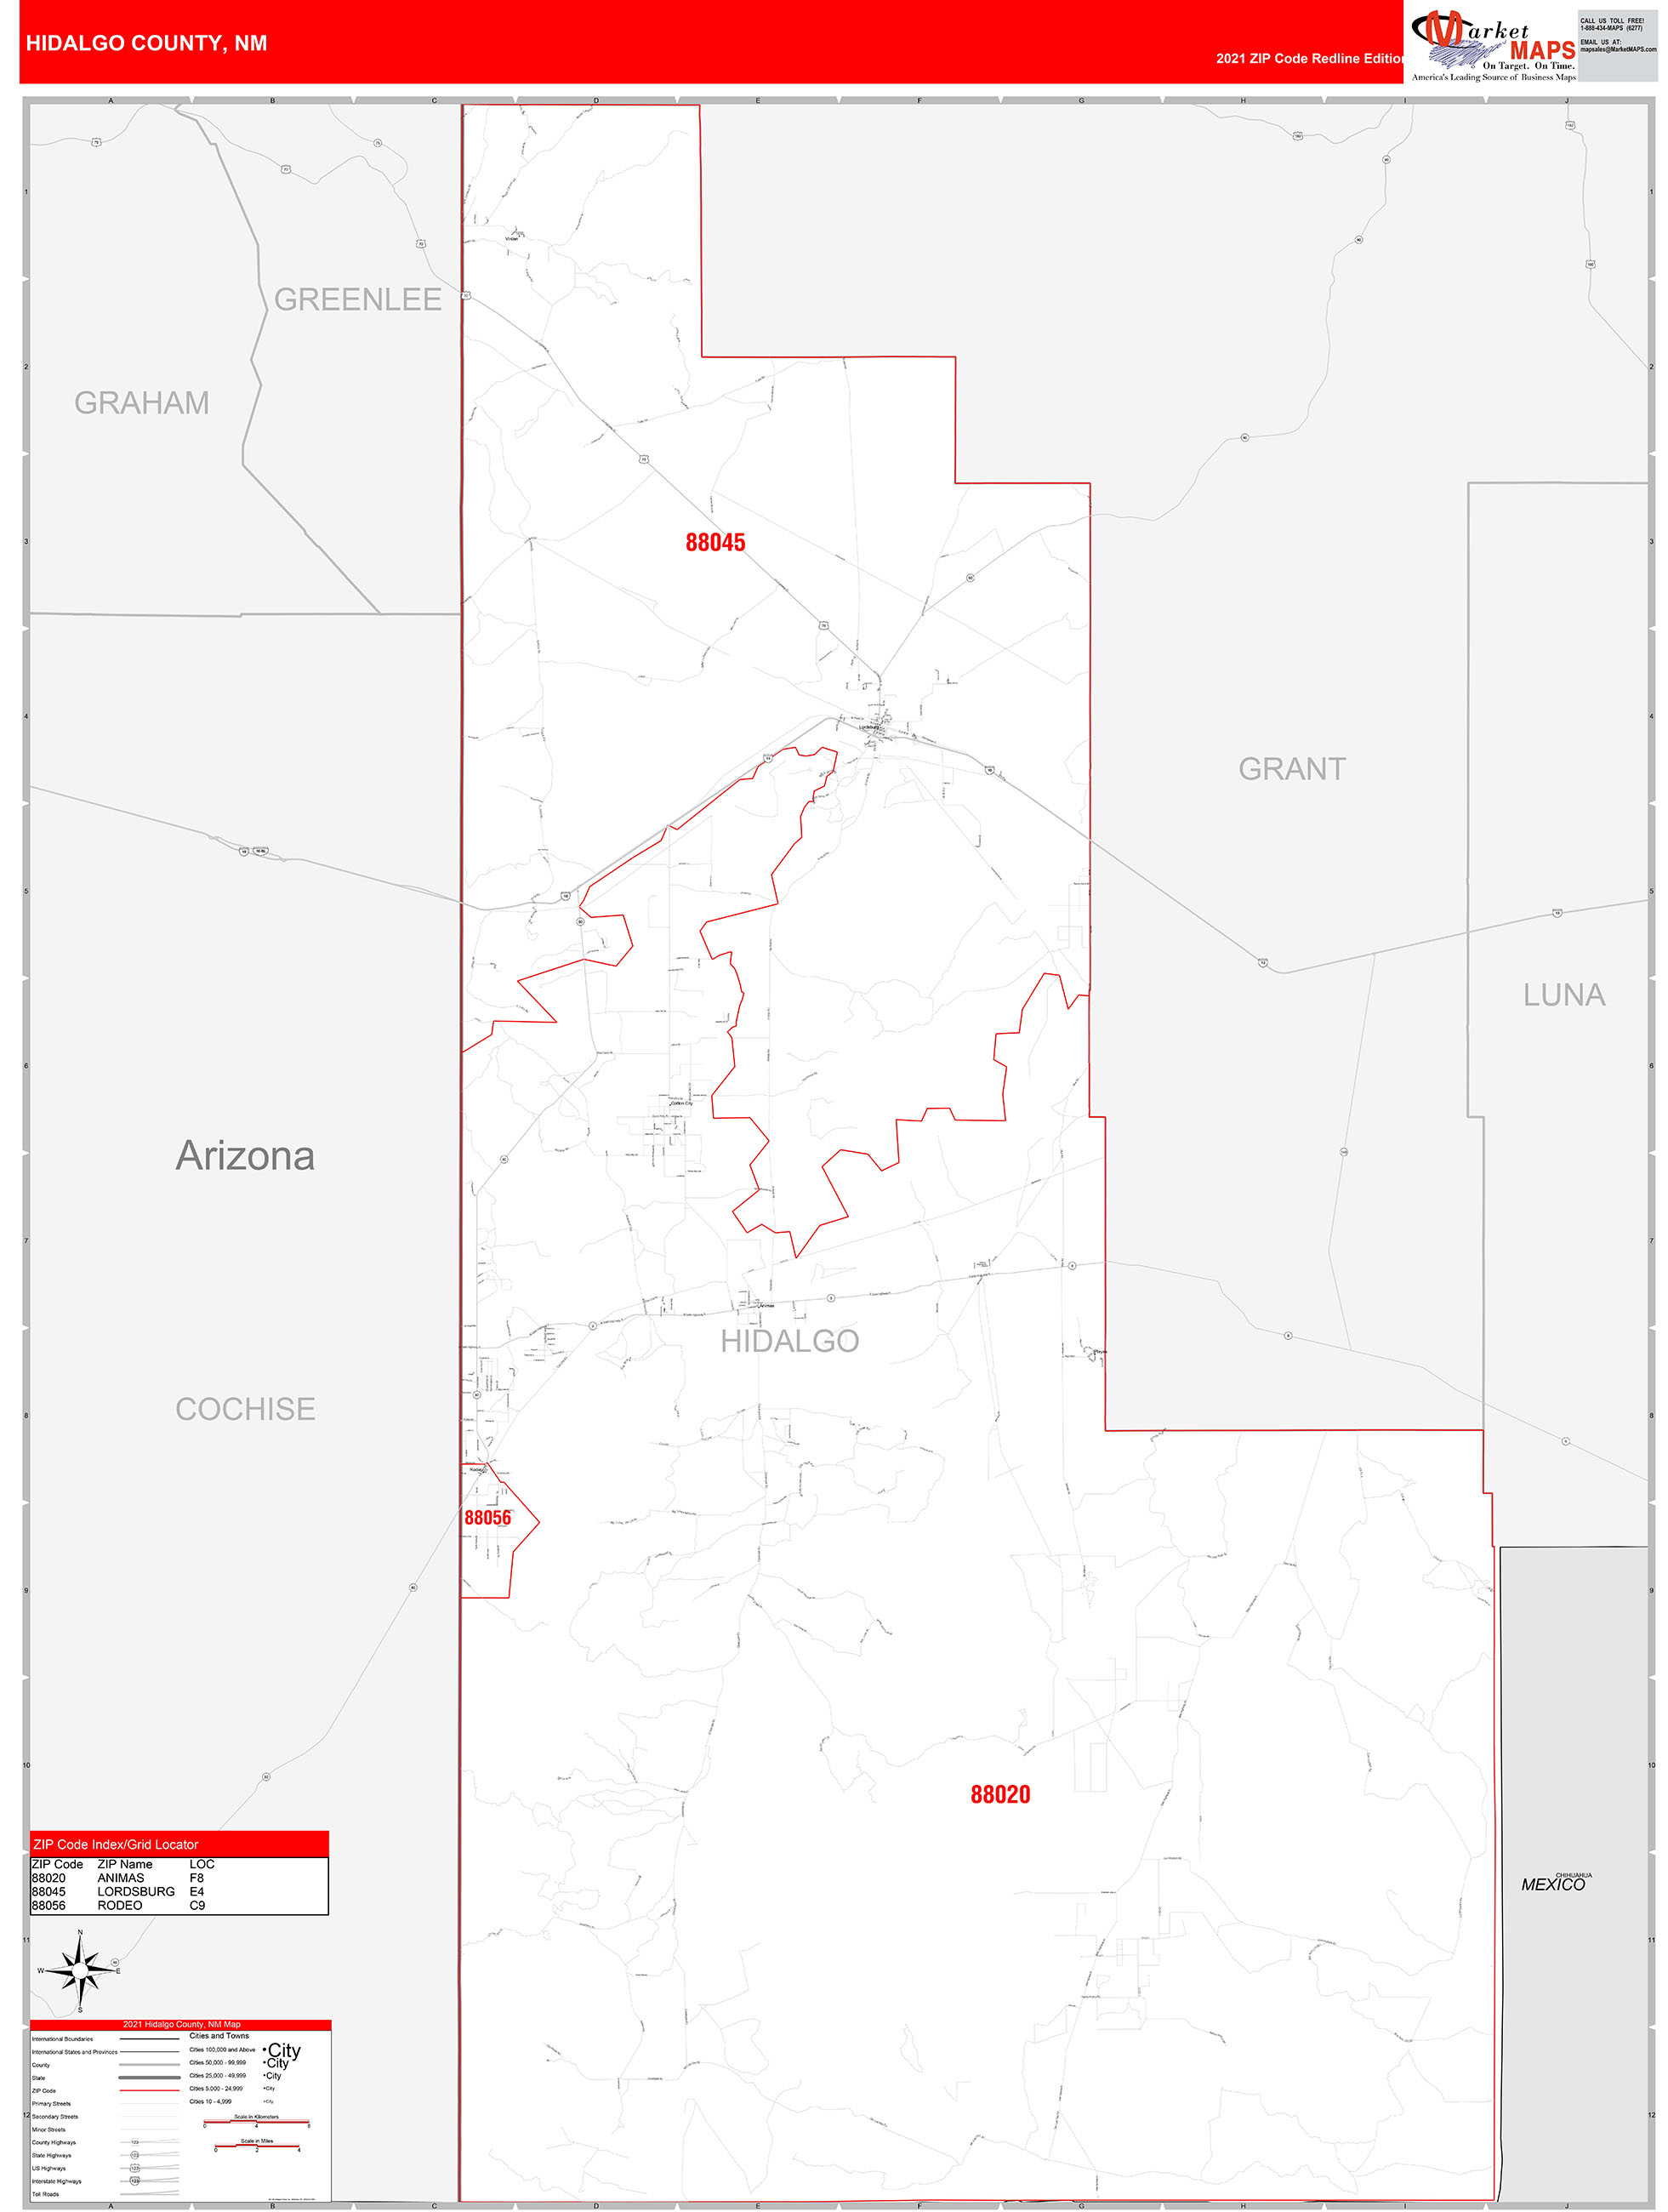 Hidalgo County, NM Zip Code Wall Map Red Line Style by MarketMAPS